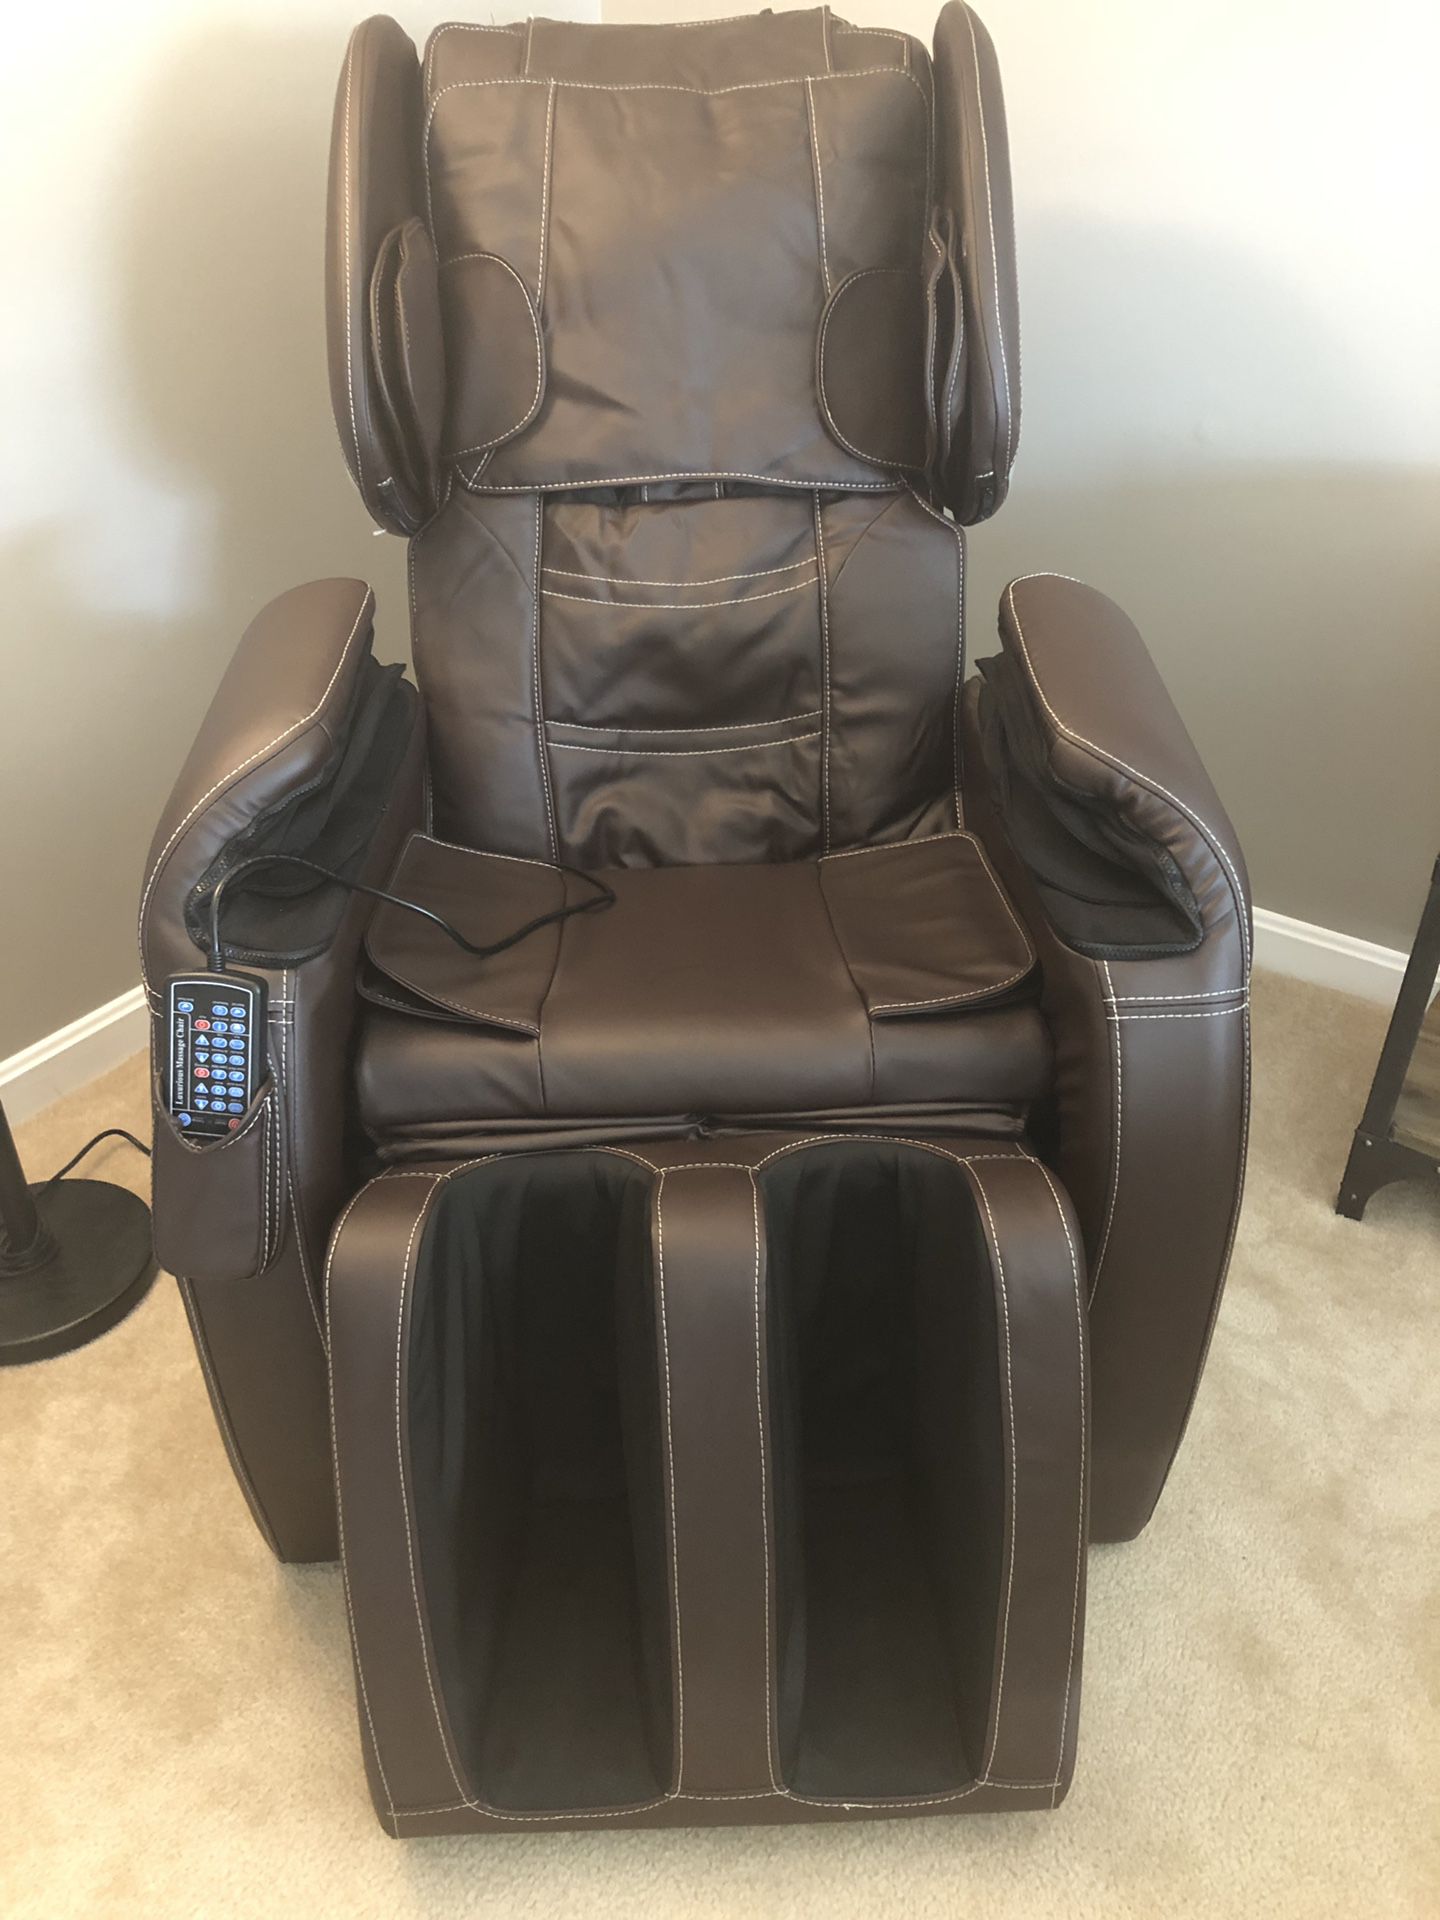 Electric Full Body massage chair recliner shiatsu, 22 airbags. Bought it back in December and used it few times.